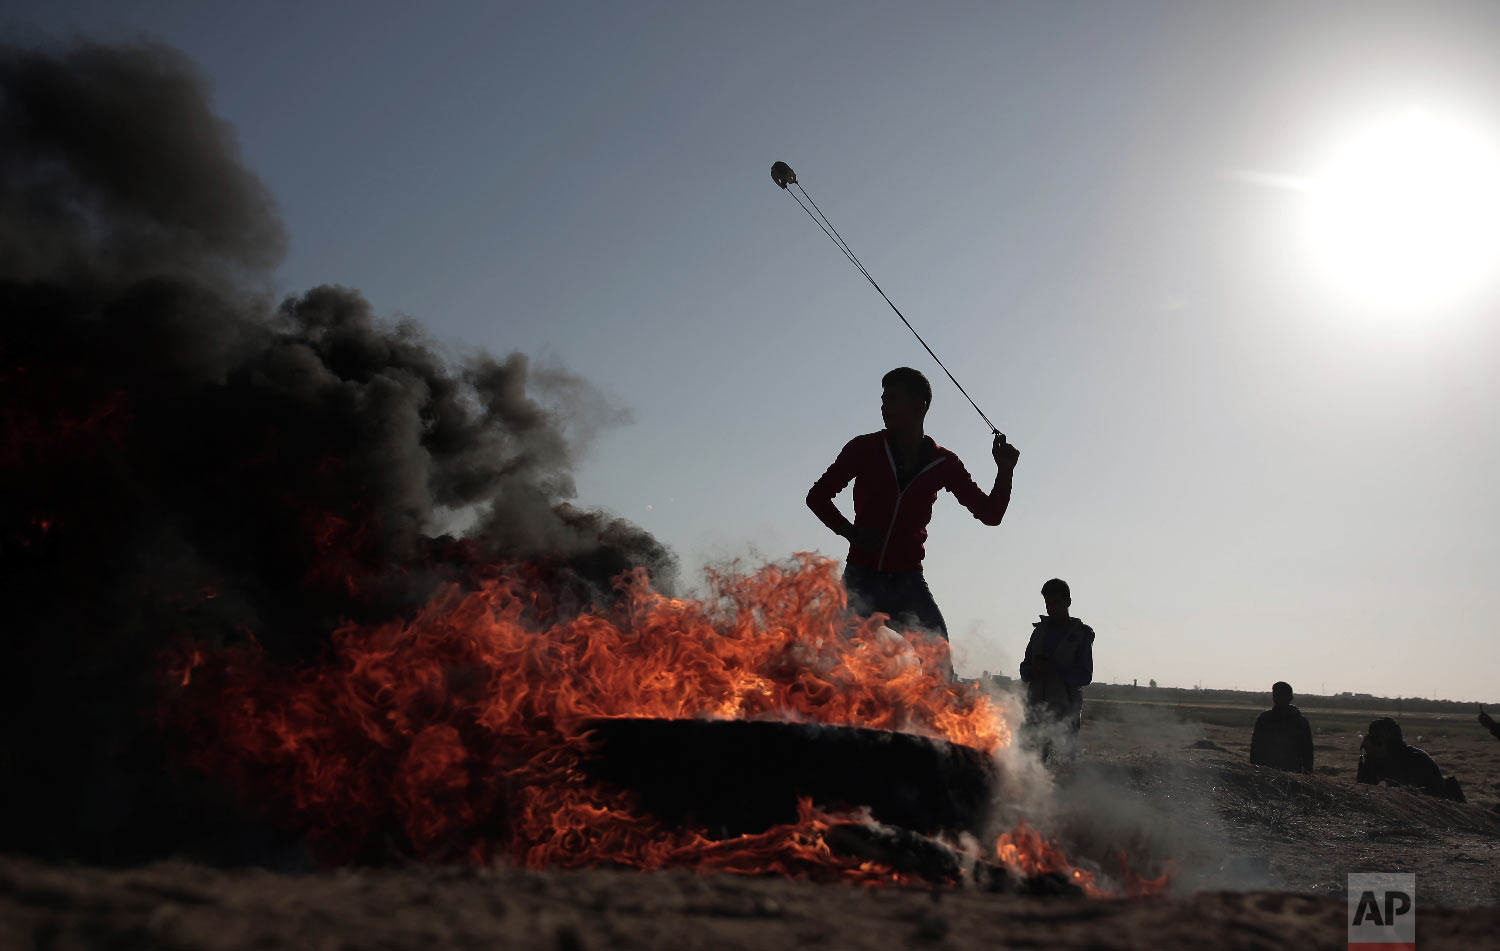  A Palestinian protester hurls stones toward Israeli soldiers during a protest near the Gaza Strip border with Israel, in eastern Gaza City, Saturday, March 31, 2018. (AP Photo/ Khalil Hamra) 